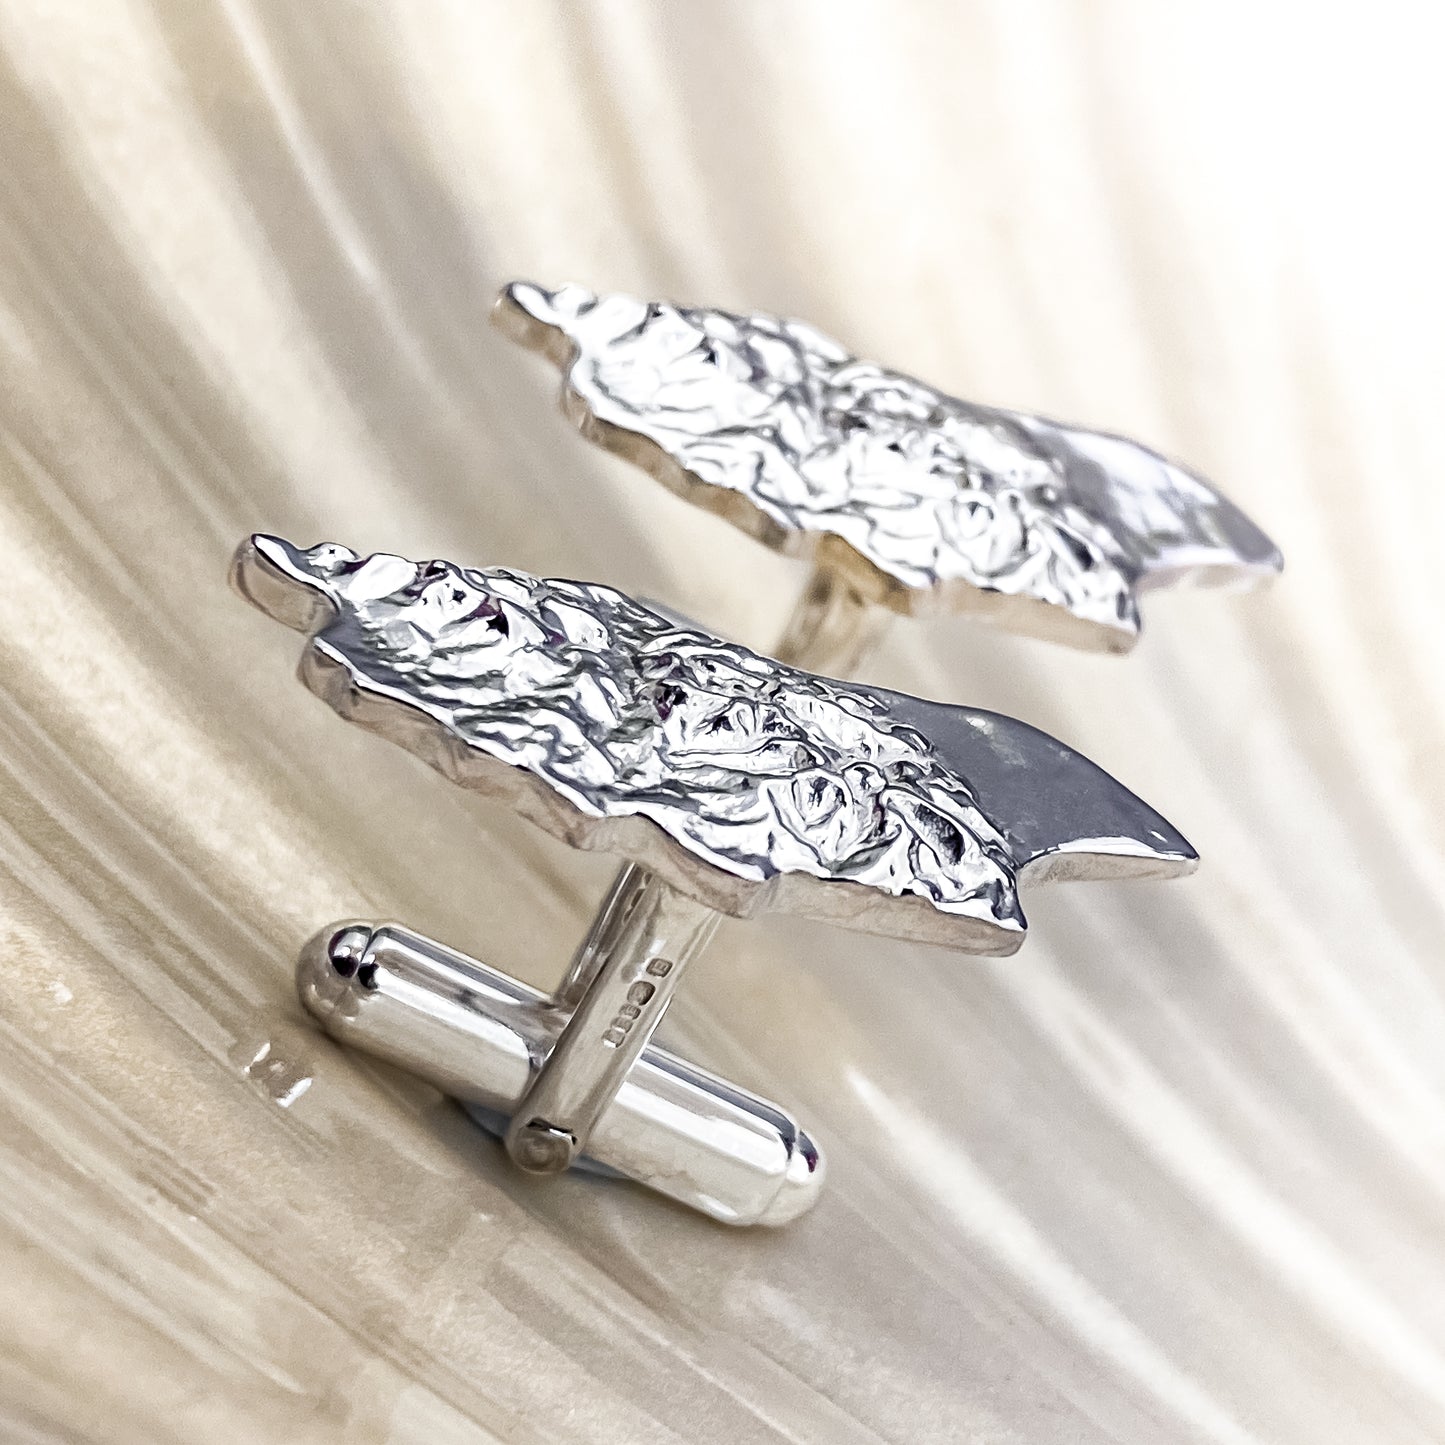 Isle of Man Topographic Sterling Silver Cufflinks